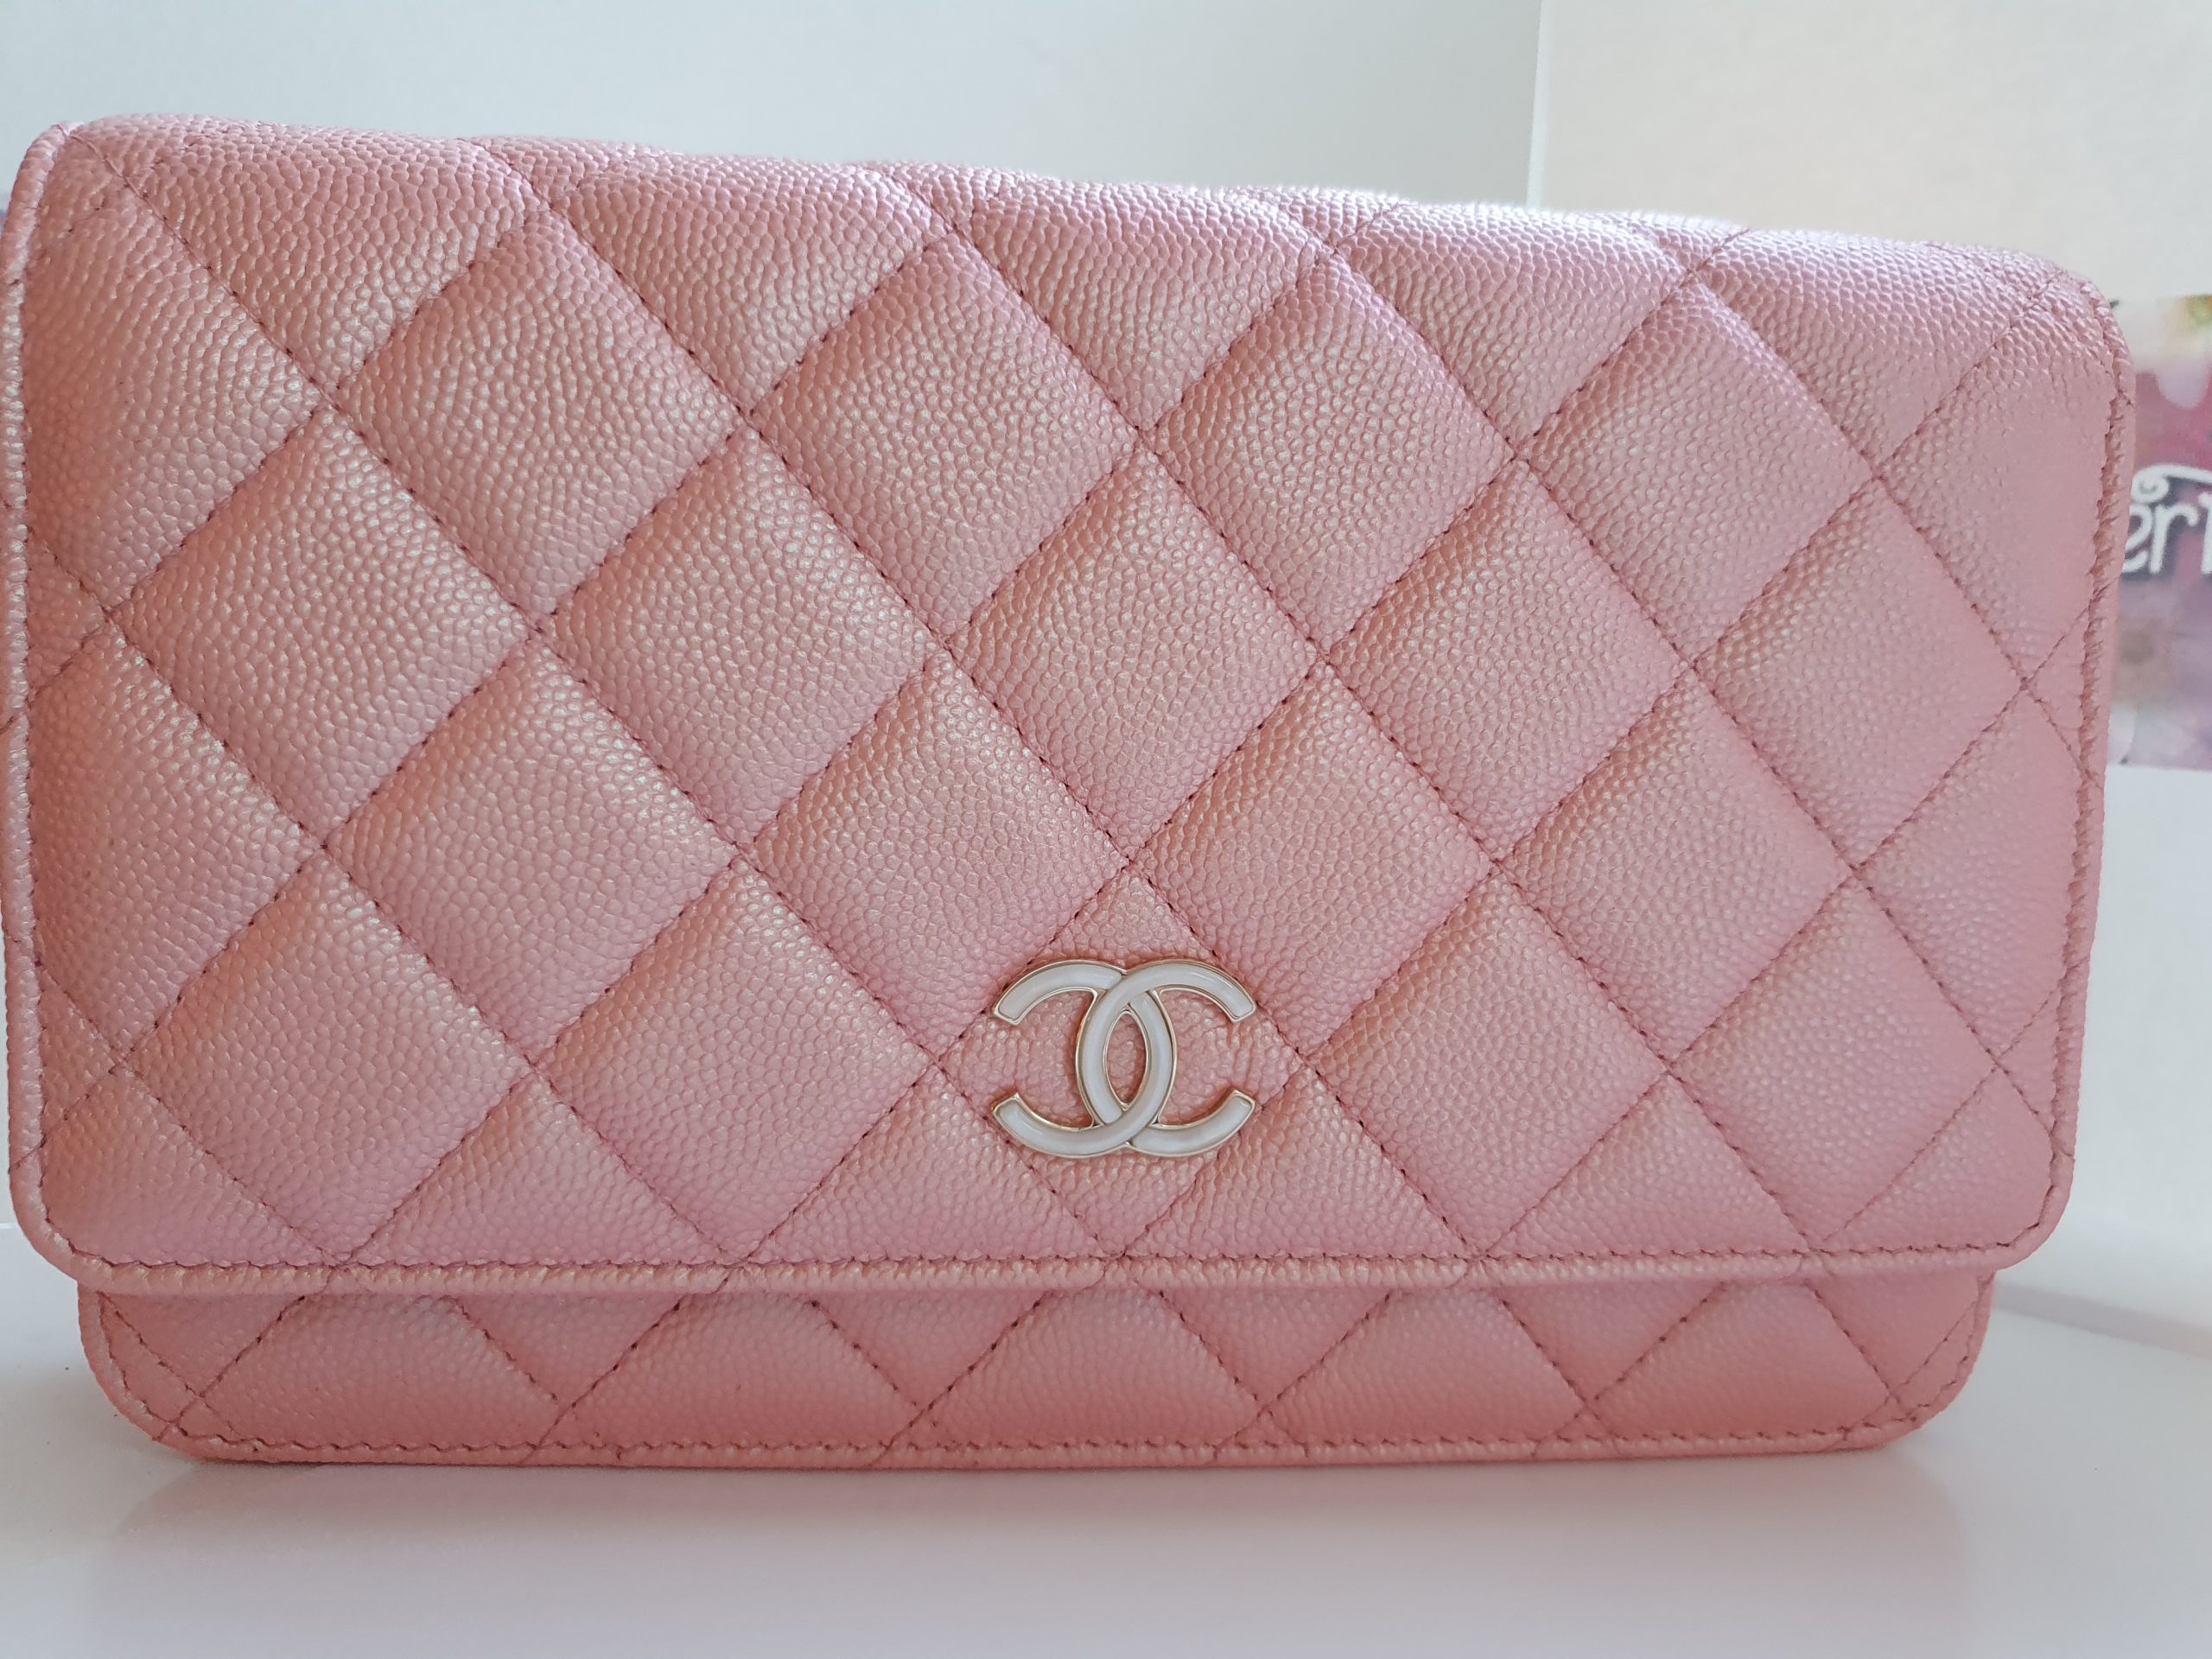 Chanel 19s Pink Iridescent Wallet on Chain WOC - Reetzy